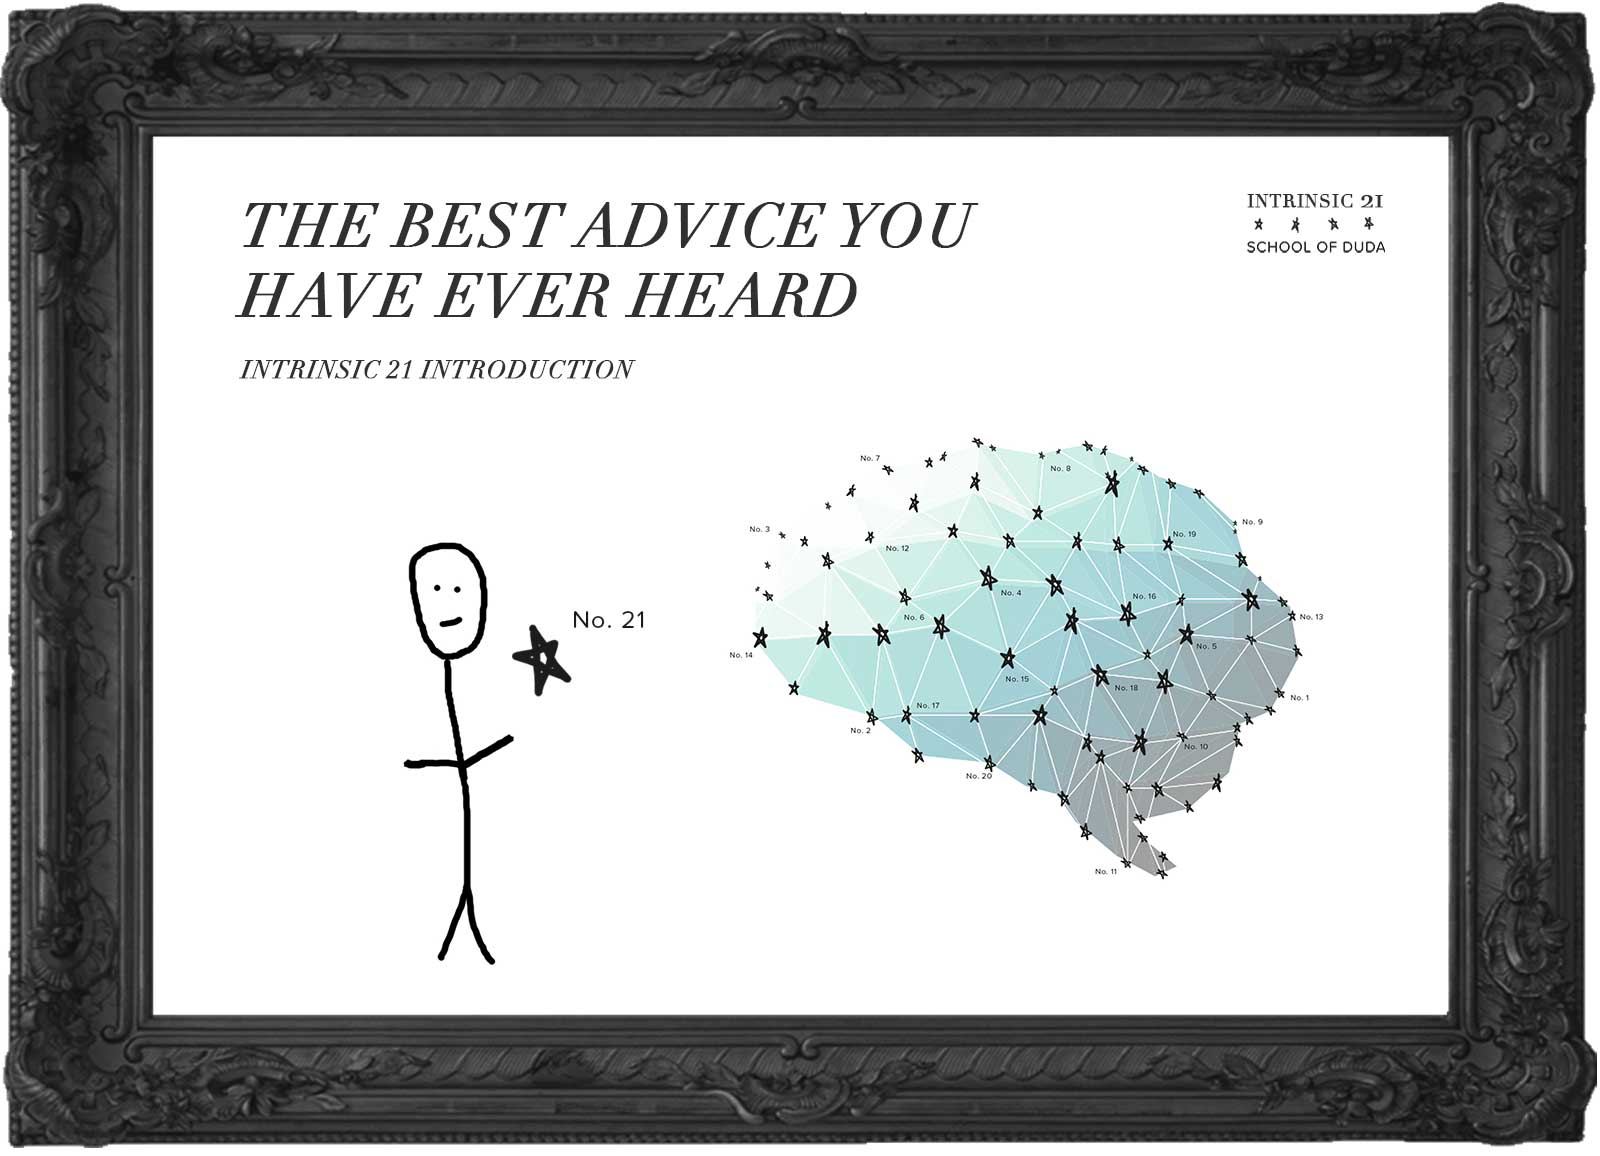 THE BEST ADVICE YOU HAVE EVER HEARD - English Course